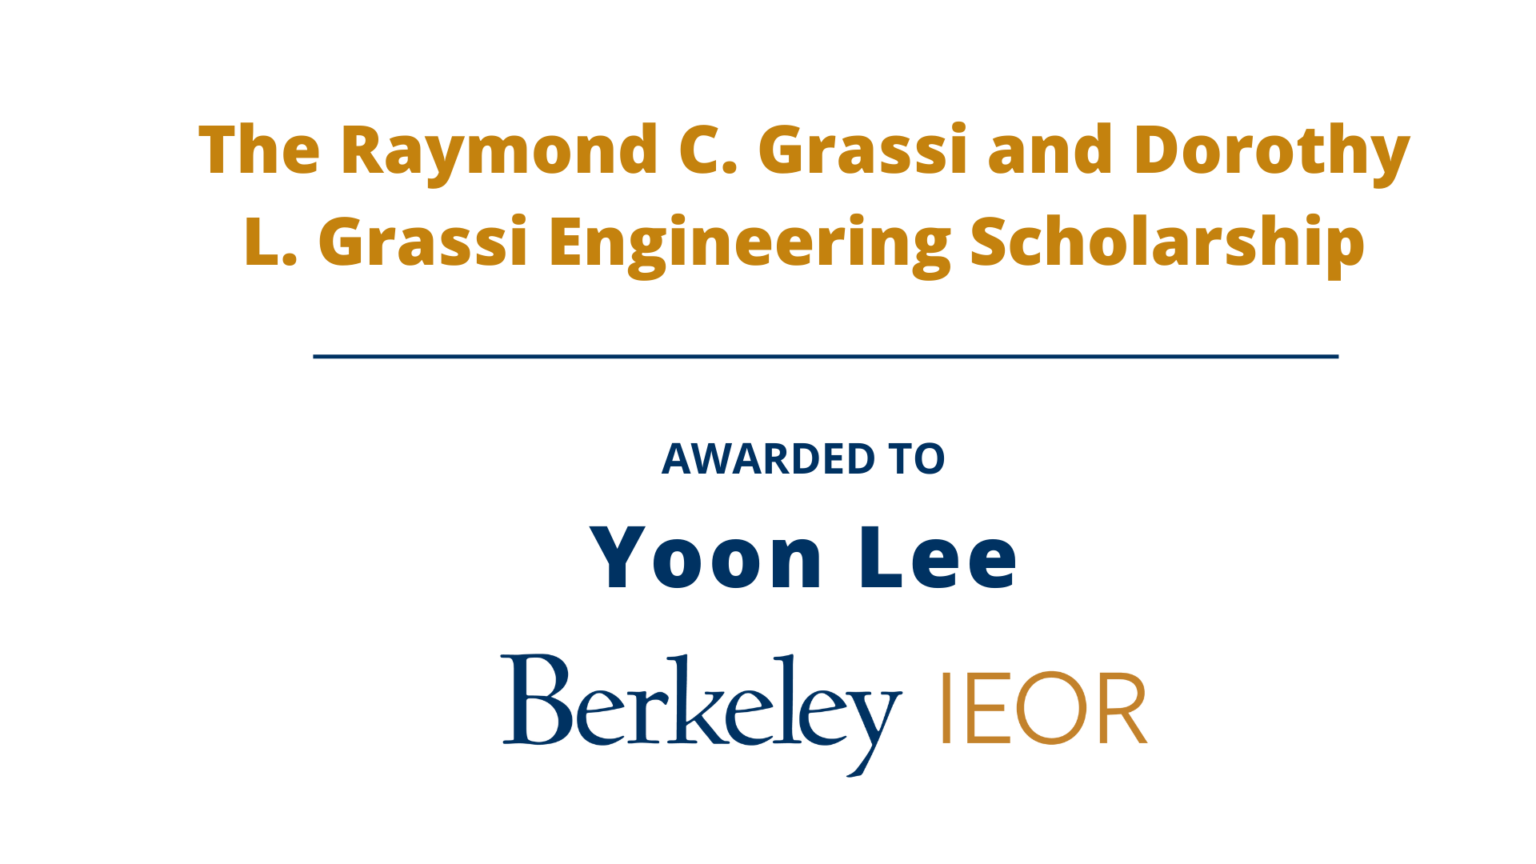 Yoon Lee, The Raymond C. Grassi and Dorothy L. Grassi Engineering Scholarship